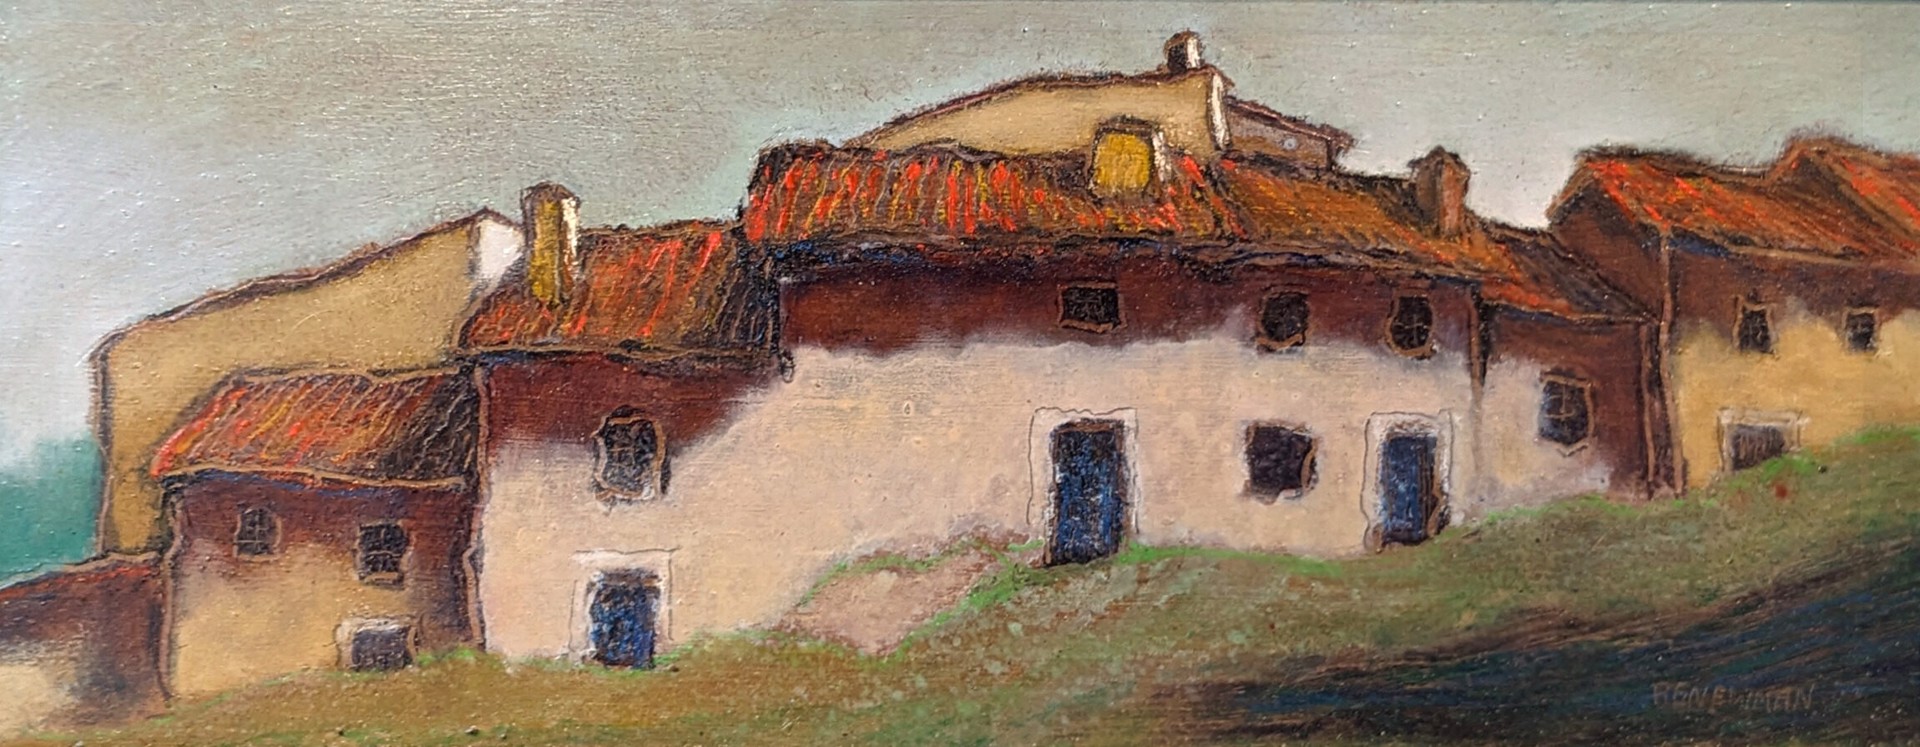 Houses on a Hillside (Tresques) by Andy Newman